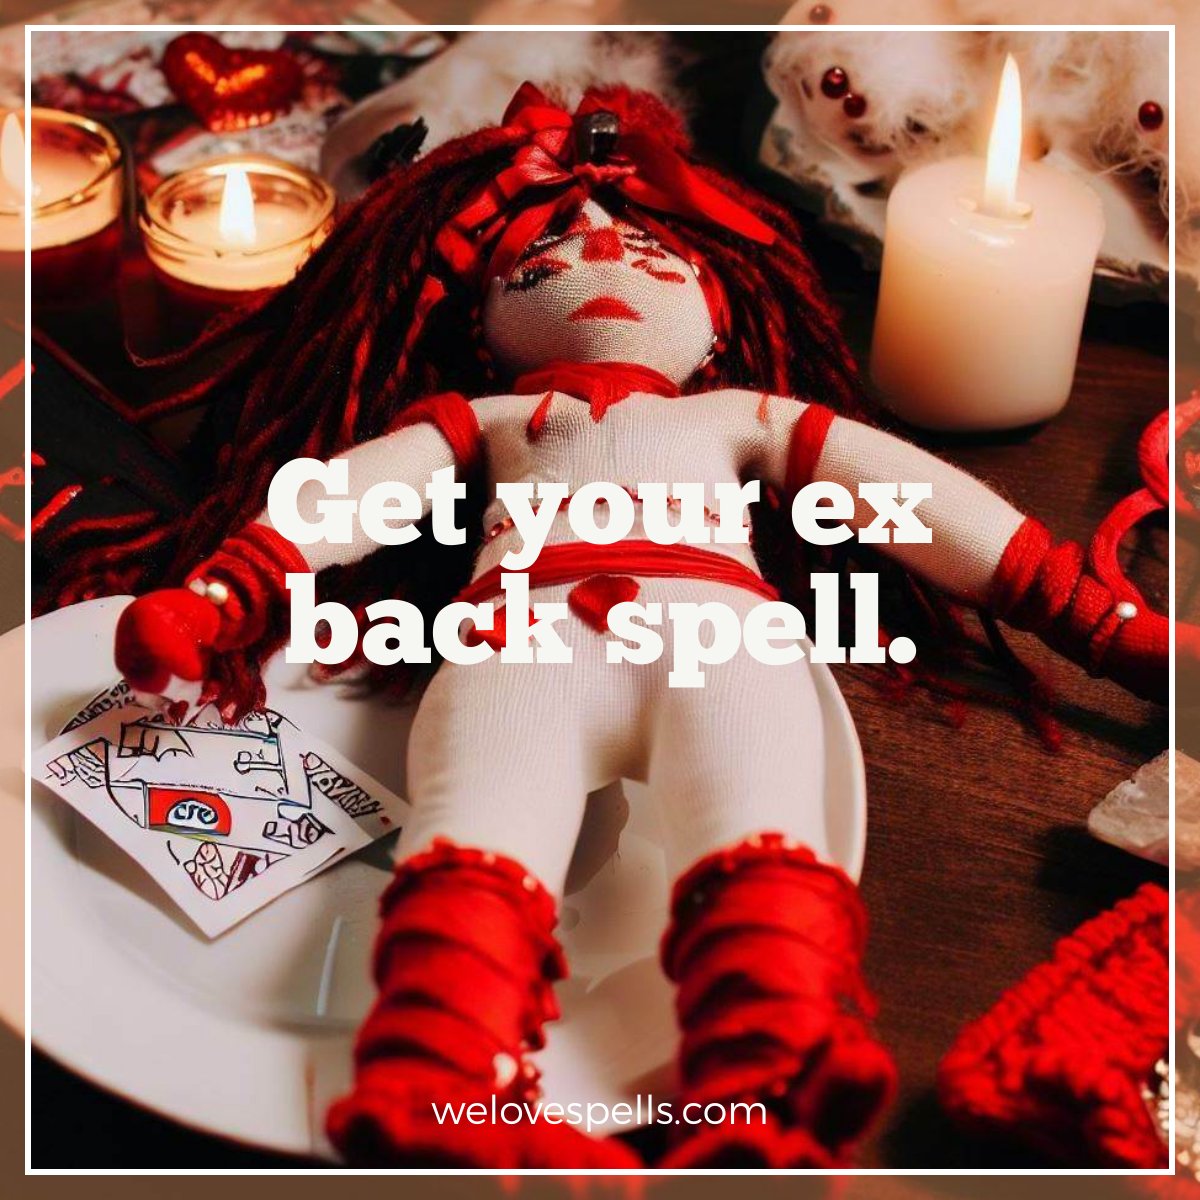 Get your Ex back 
welovespells.net/products/get-y…

#wiccan  #wiccanspells #witch #witchcraft #witchy #witches #witchyvibes #witchywoman #greenwitch #spells #lovespells #castingspells  #magicspells #spell #psychic #psychicreading #psychicreadings #tarot #occult #tarotreading